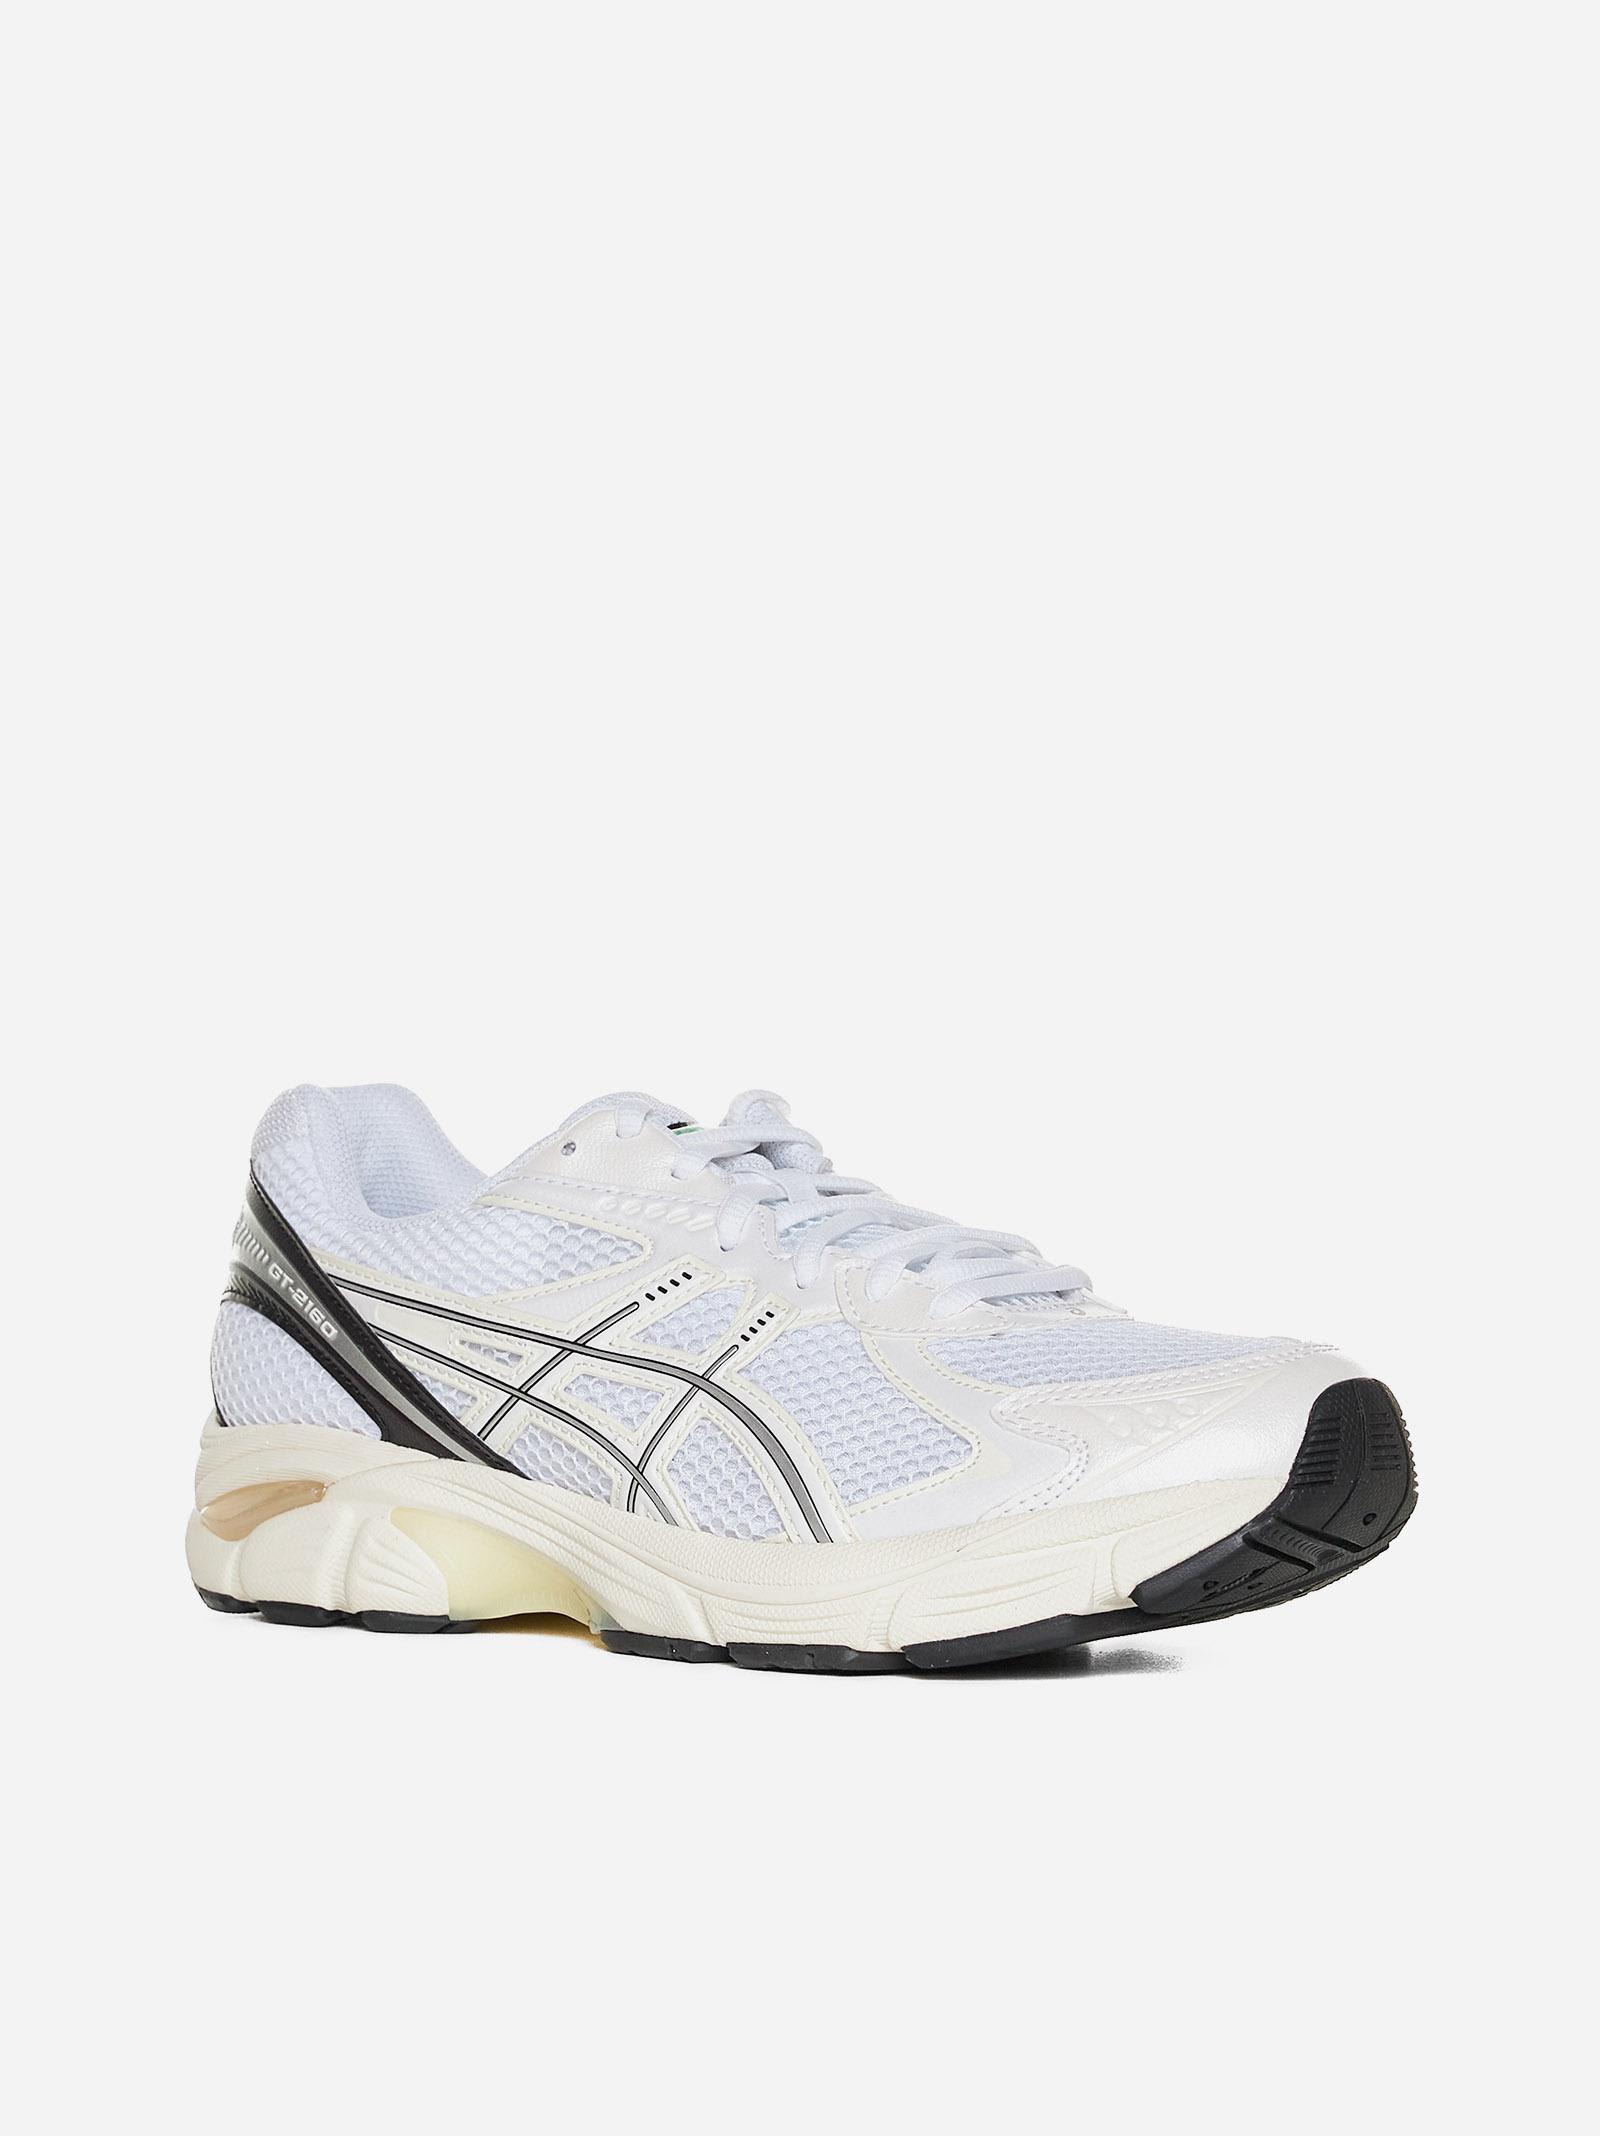 Shop Asics Gt-2160 Sneakers In White/black